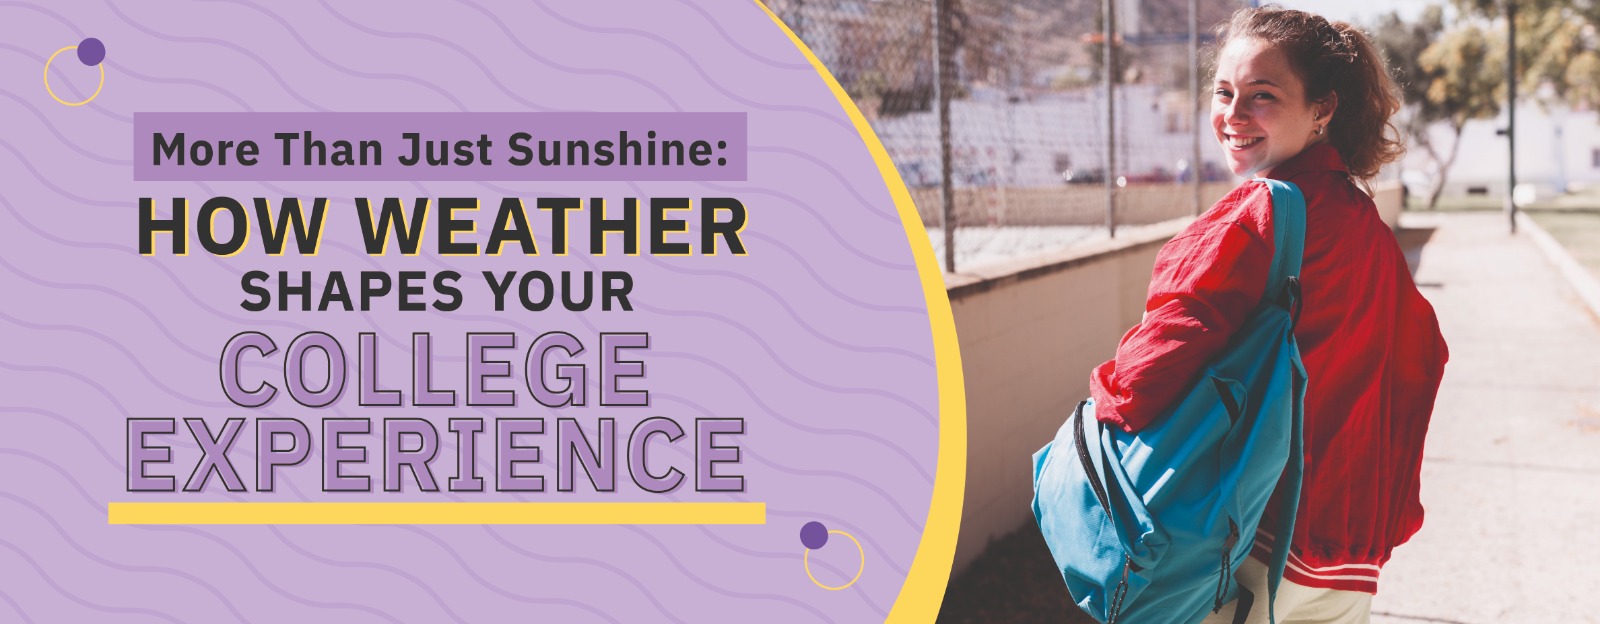 More Than Just Sunshine: How Weather Shapes Your College Experience